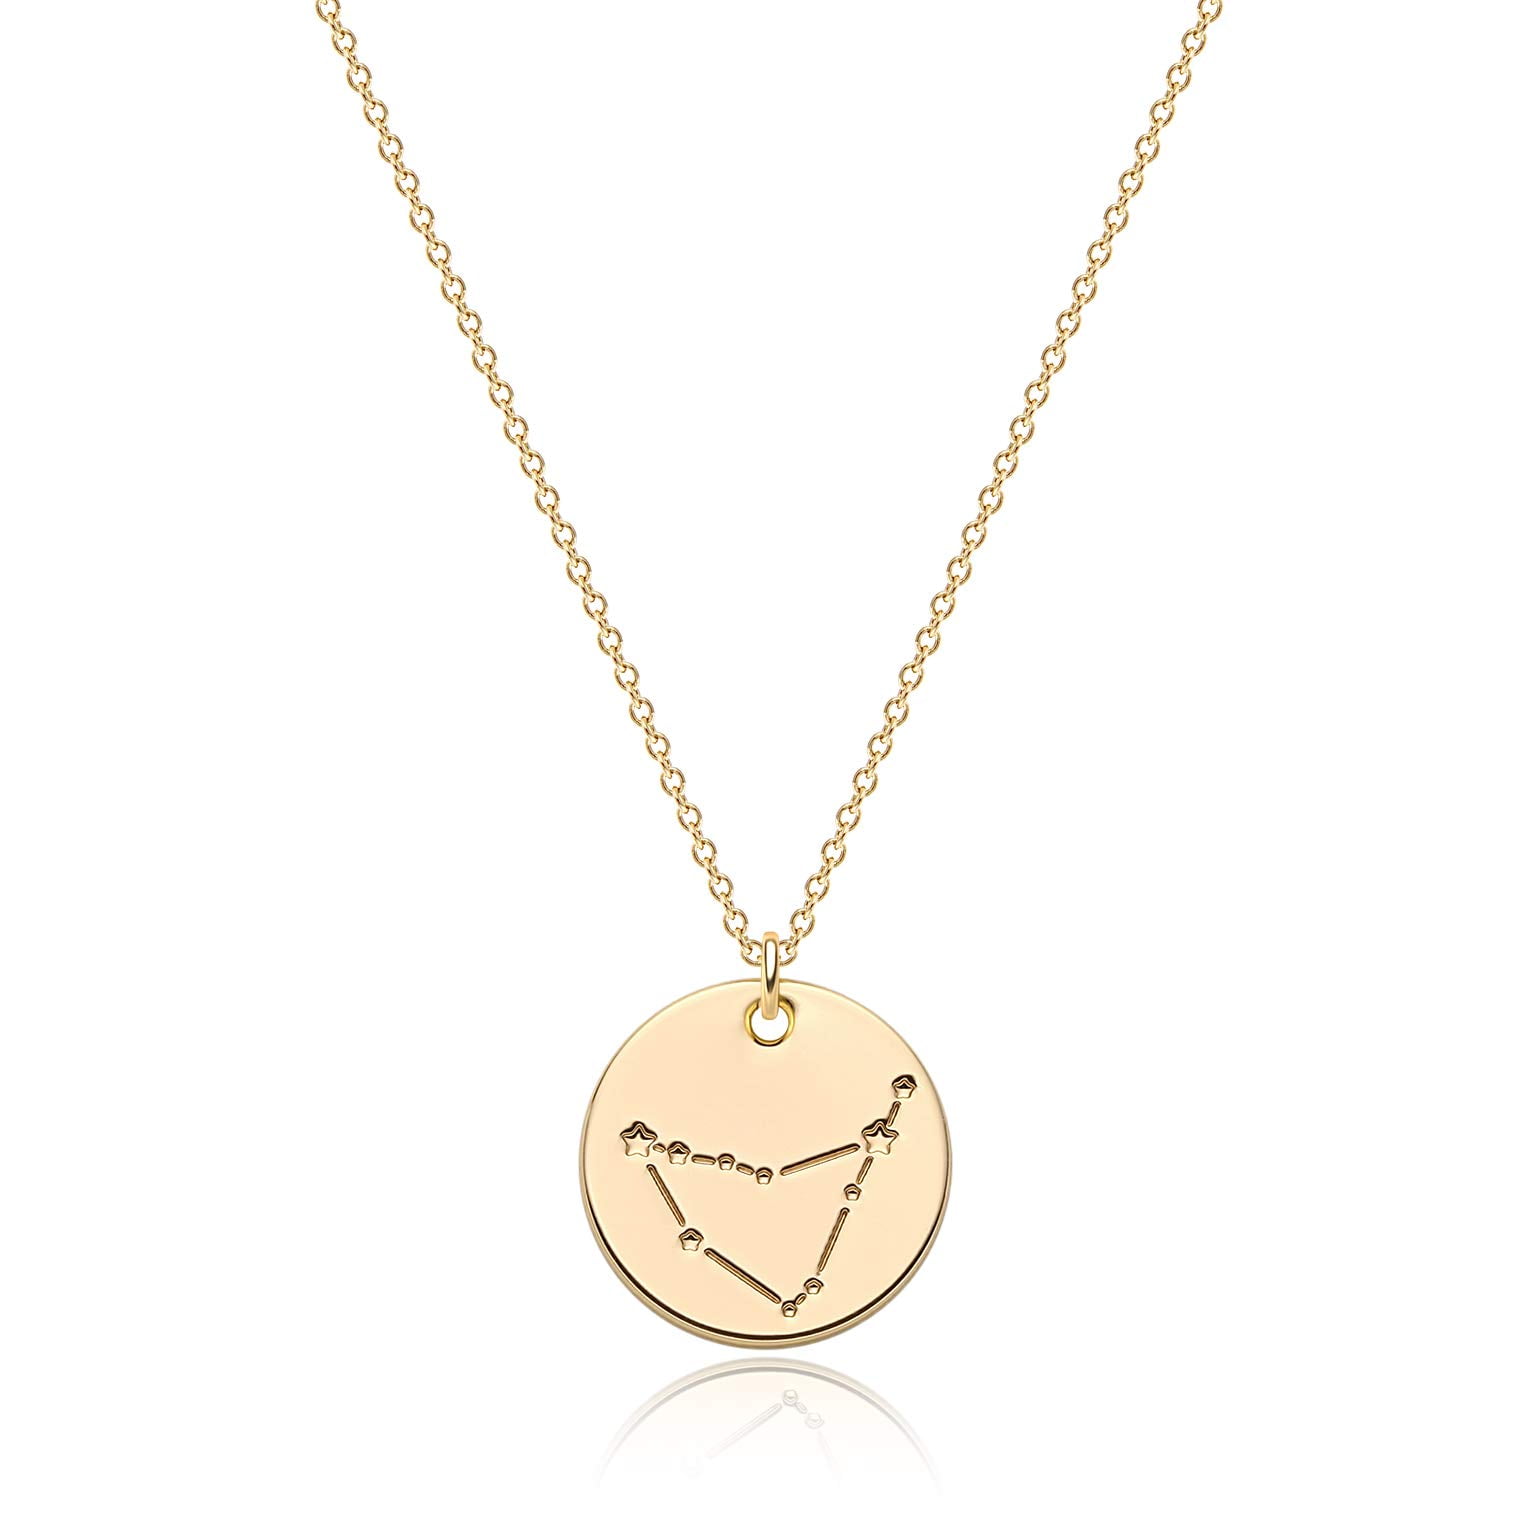 Details about   14K Solid Gold Gemini Zodiac Sign in Circle Rope Pendant Necklace